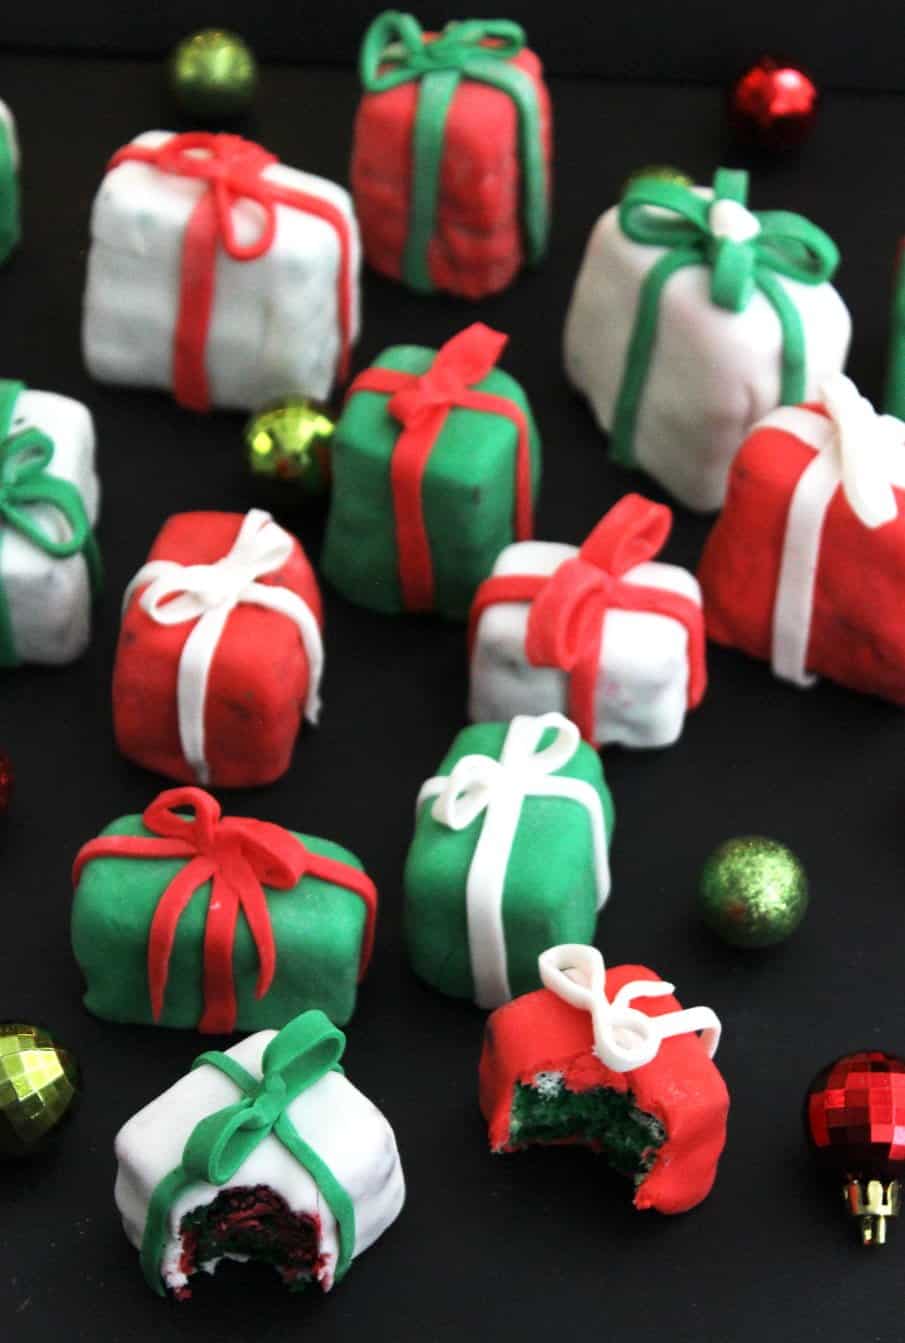 These mini Christmas Present Cakes are perfect for entertaining over the festive season! A simple sponge and buttercream recipe they are perfect for a novice baker - like me! Mix and match vibrant colours for full on Christmas appeal! Christmas Cake | Christmas Party Food | Sponge Christmas cakes | Party Food #christmascake #partyfood #festivedessert #christmasdessert